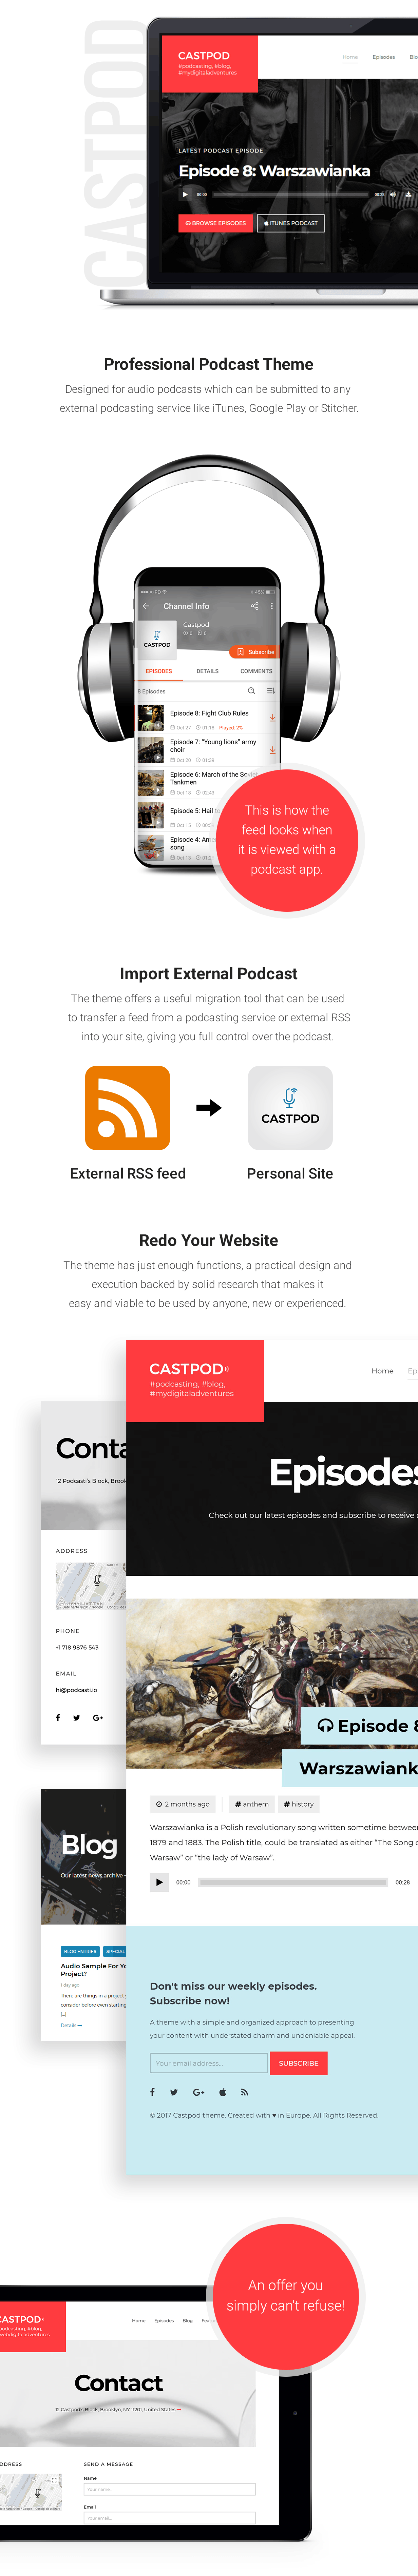 A set of different pages of castpod a professional wordpress theme for audio podcasts.